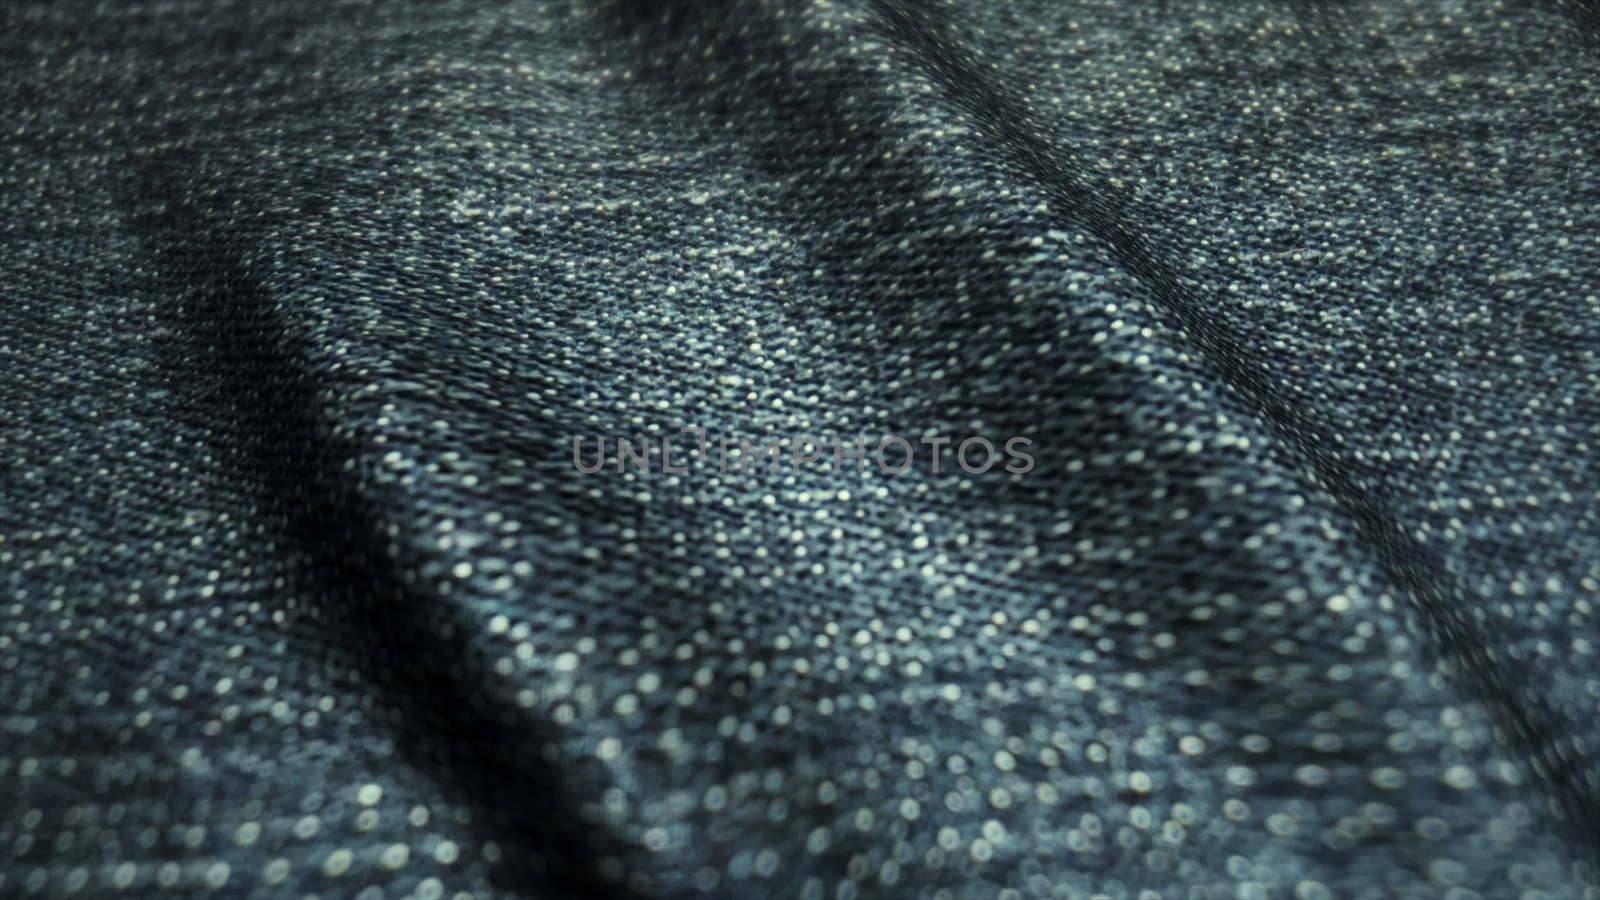 Realistic jeans waving in the wind. Abstract background Ultra-HD resolution. Close-up fabric texture. Seamless loop.